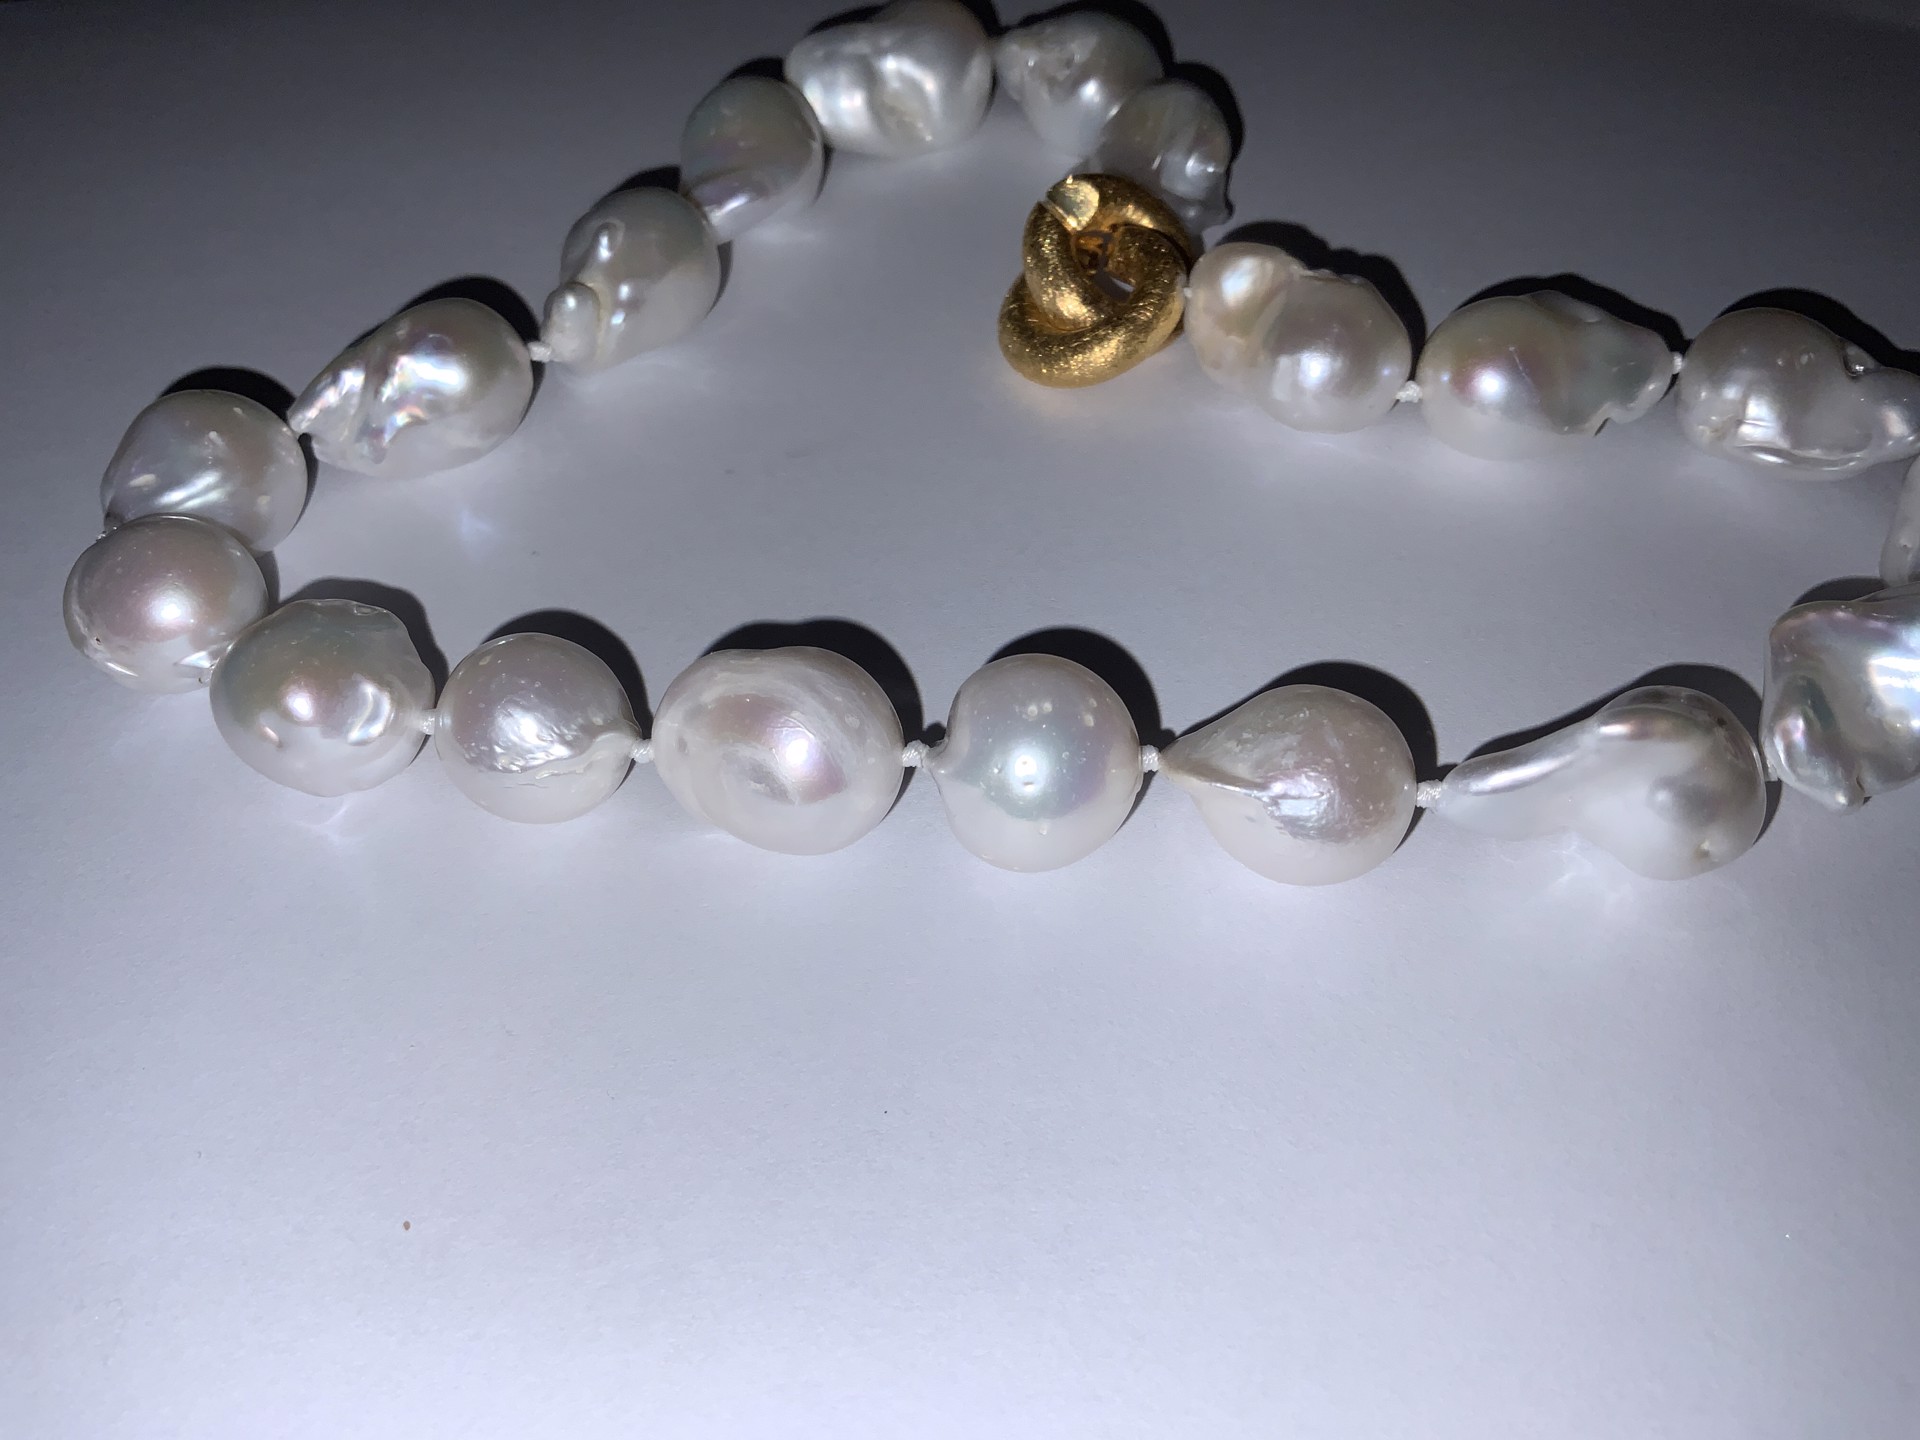 Ivory Baroque Pearls Golden Clasp by Bittersweet Designs